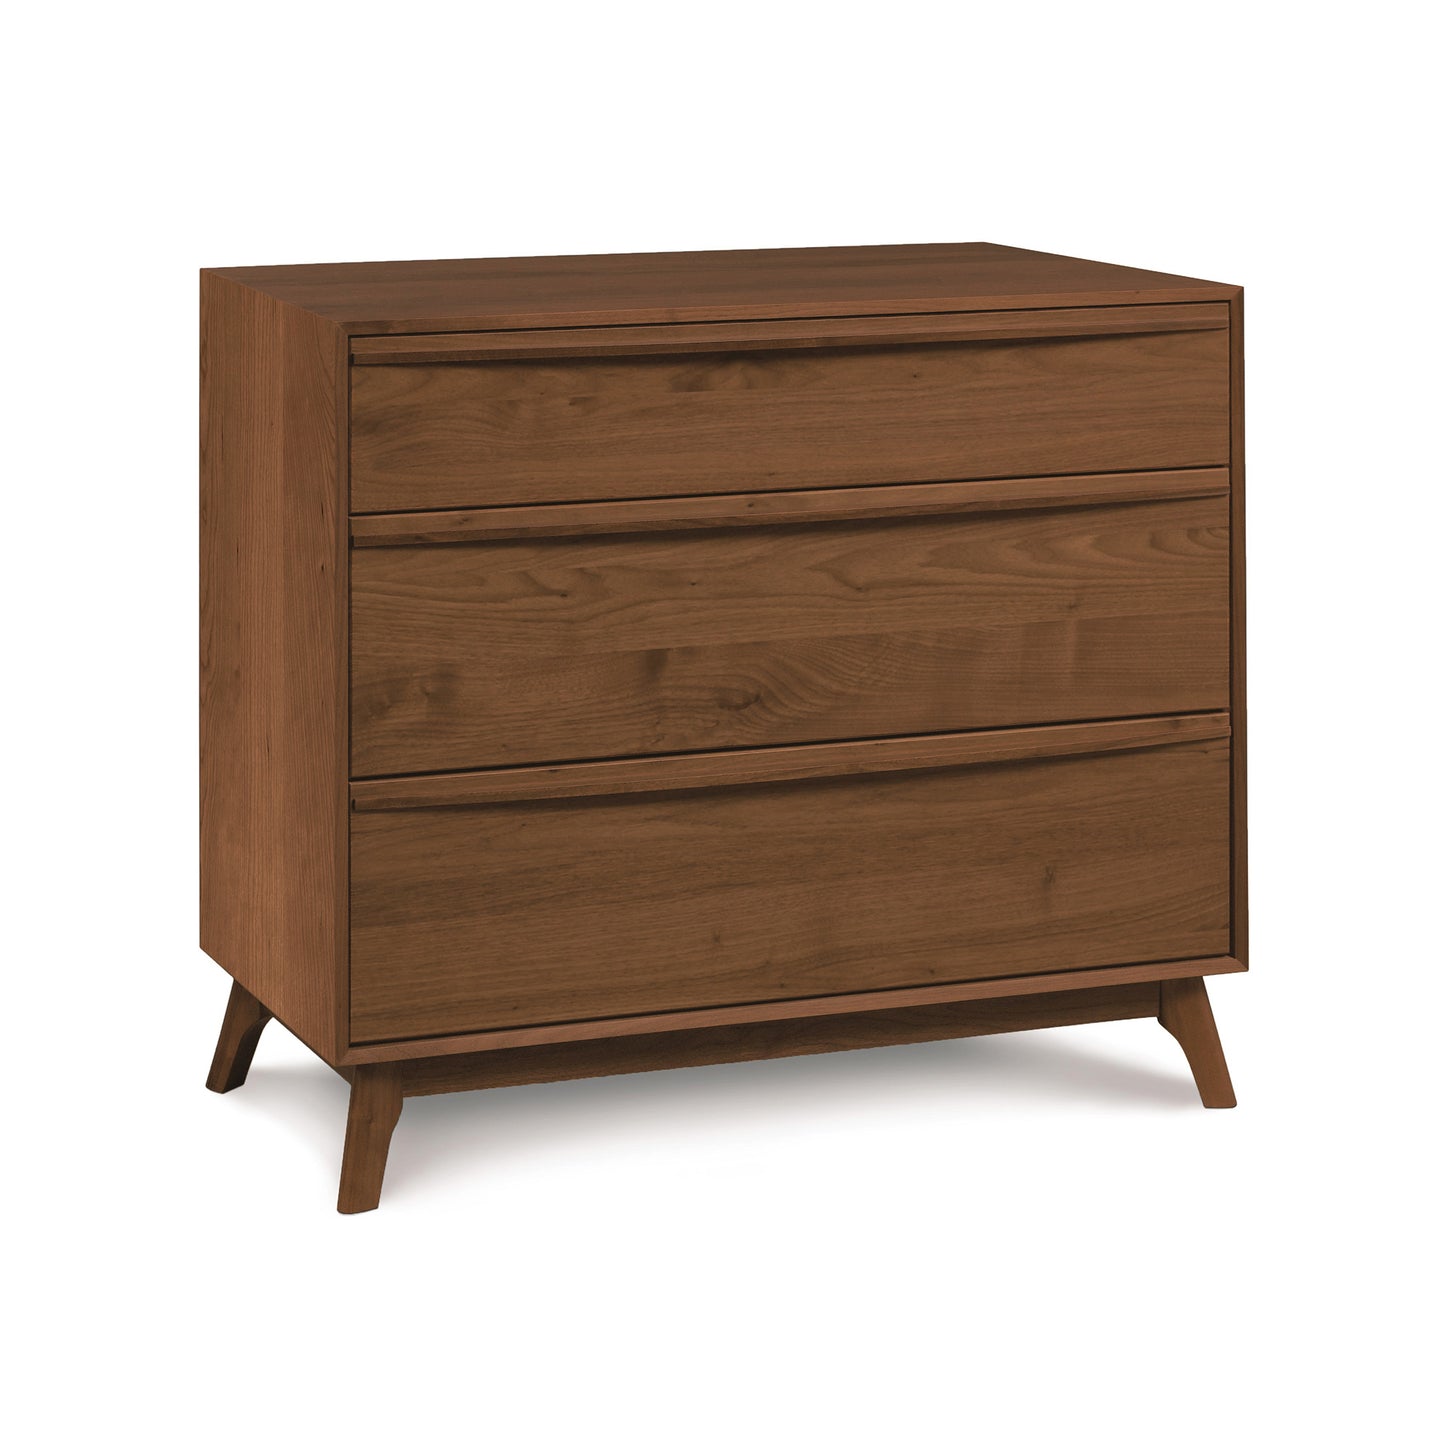 A solid natural cherry Copeland Furniture Catalina 3-Drawer Chest on angled legs with a modern design.